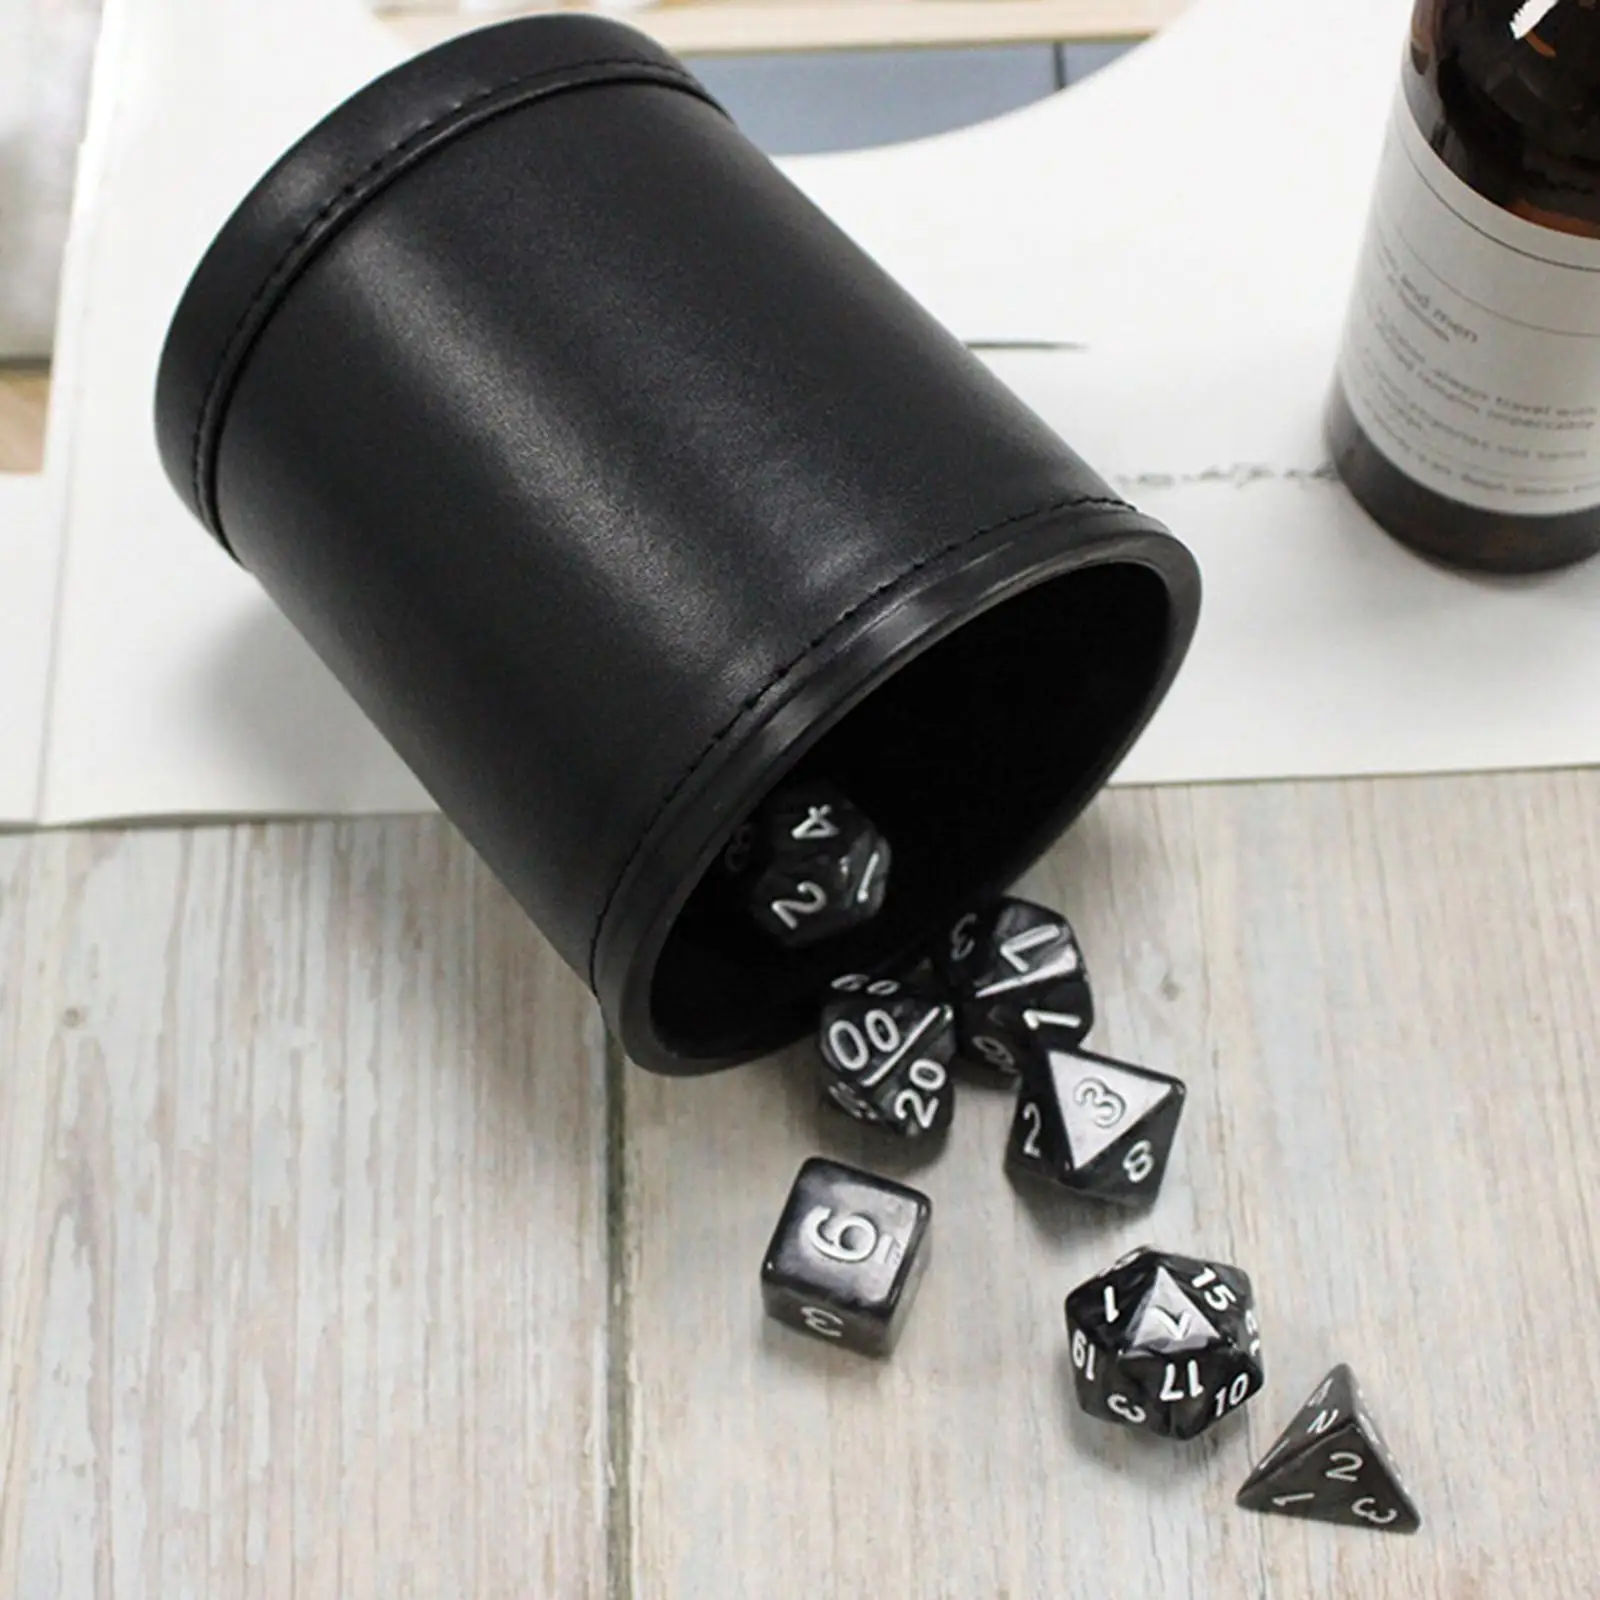 Manual Dice Cup Dice Game Supplies Professional Entertainment Leather Dice Box Dice Decider Dice Shaker for Club Bar Ktv Party